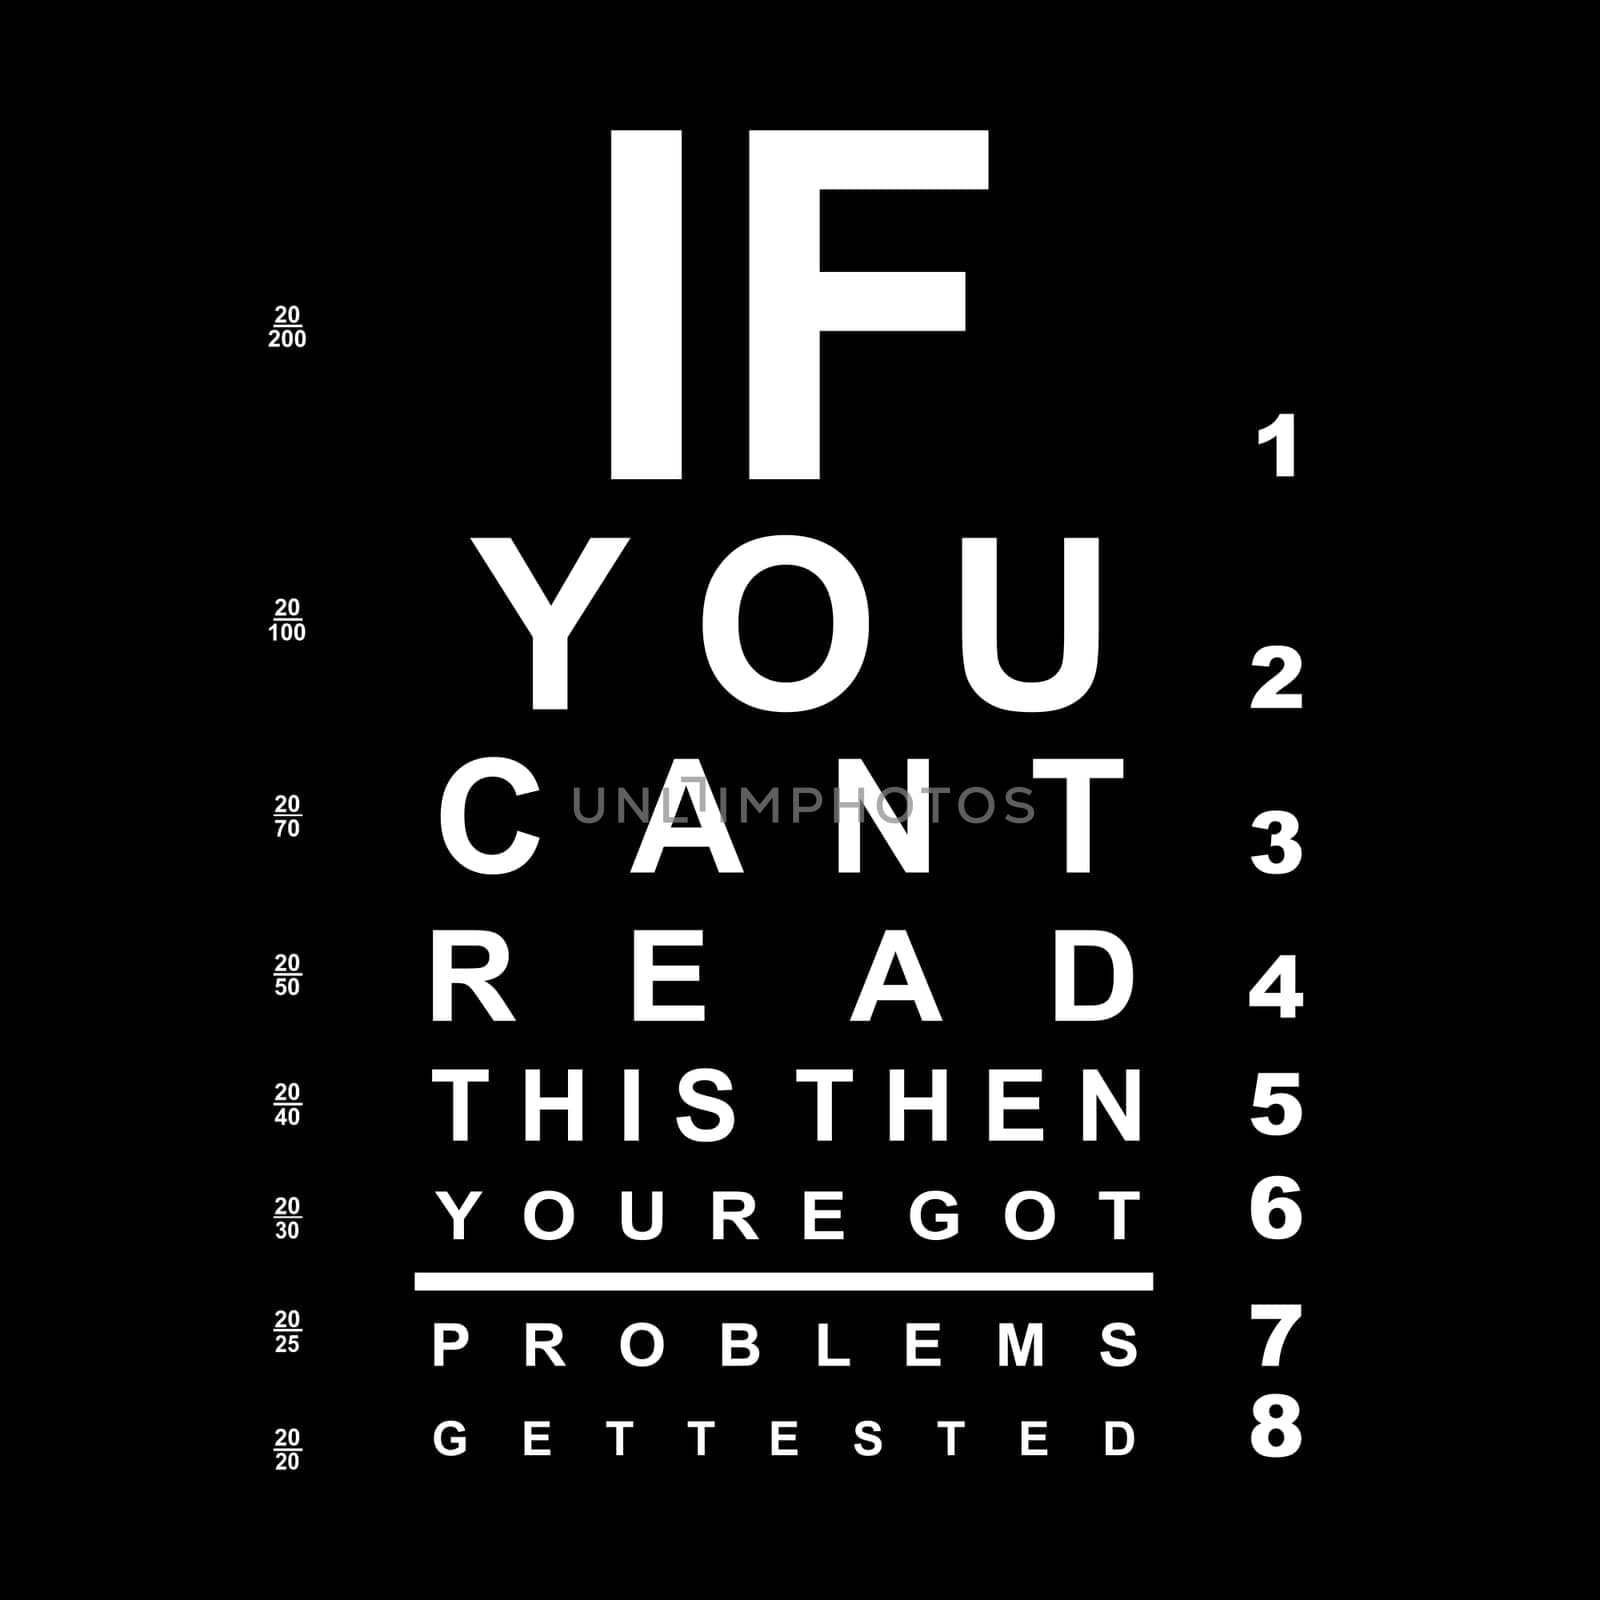 A eye chart with the text "If you can't read this eye chart, then you've got problems, get tested"